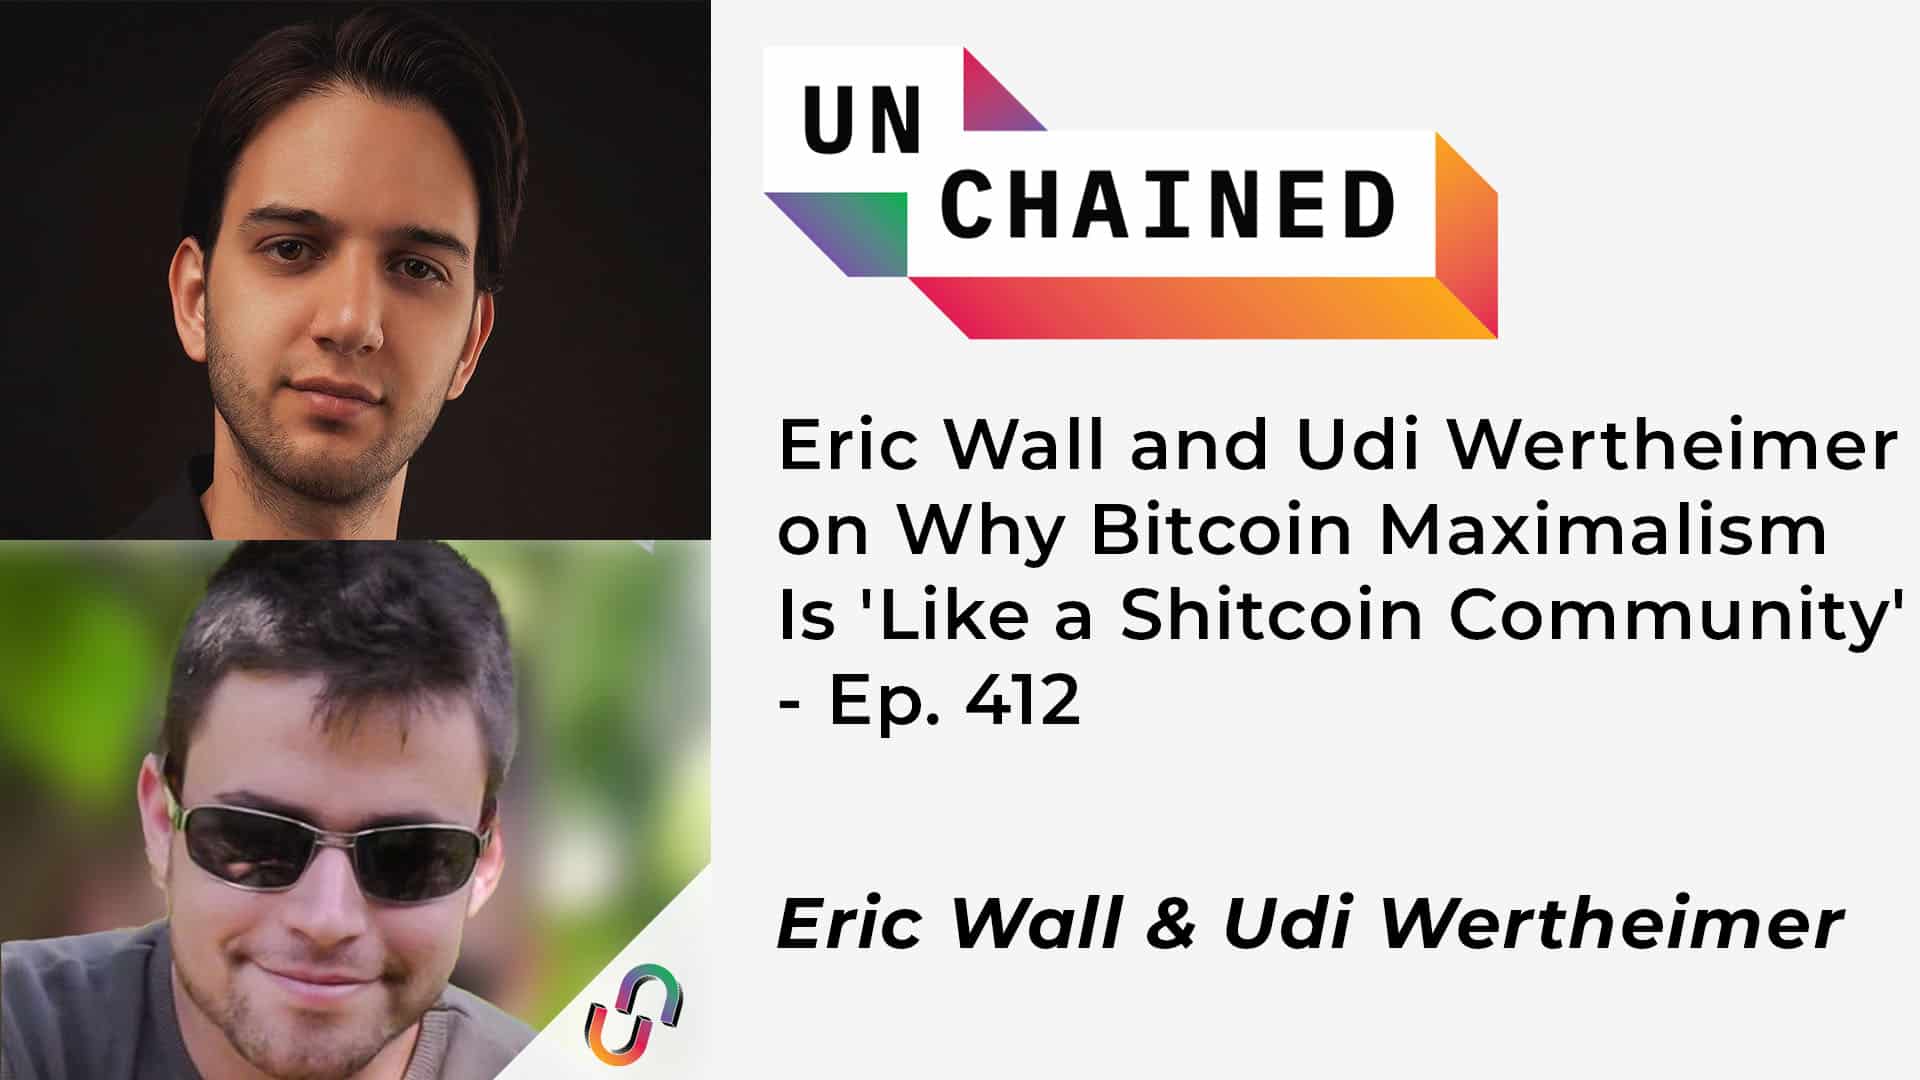 Eric Wall and Udi Wertheimer on Why Bitcoin Maximalism Is 'Like a Shitcoin Community' - Ep. 412